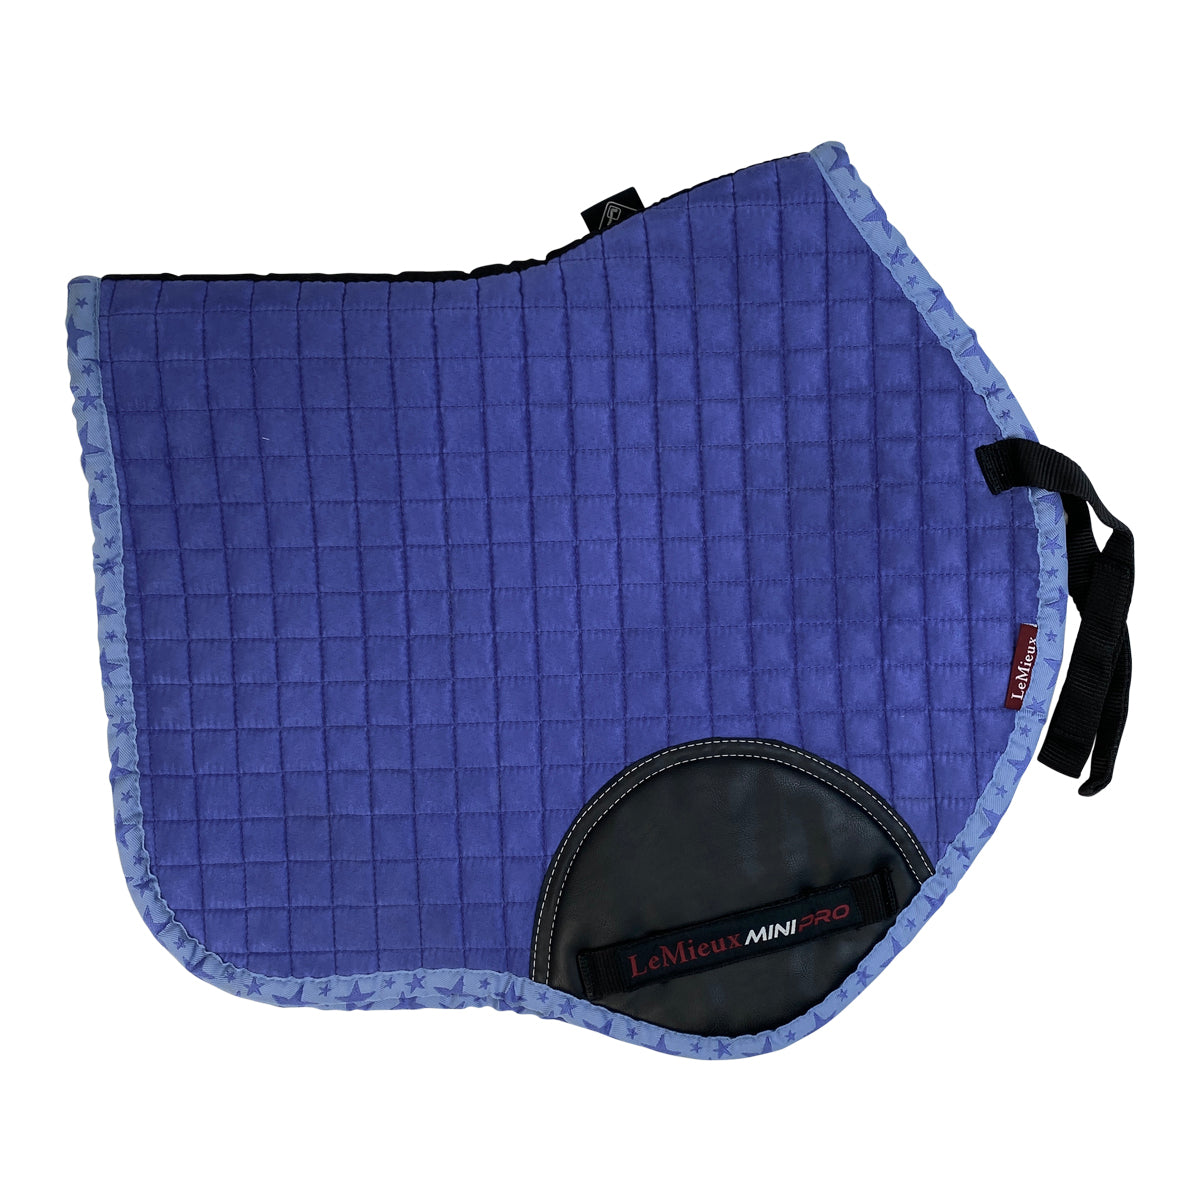 LeMieux Mini Suede Jump Square Pad in Bluebell